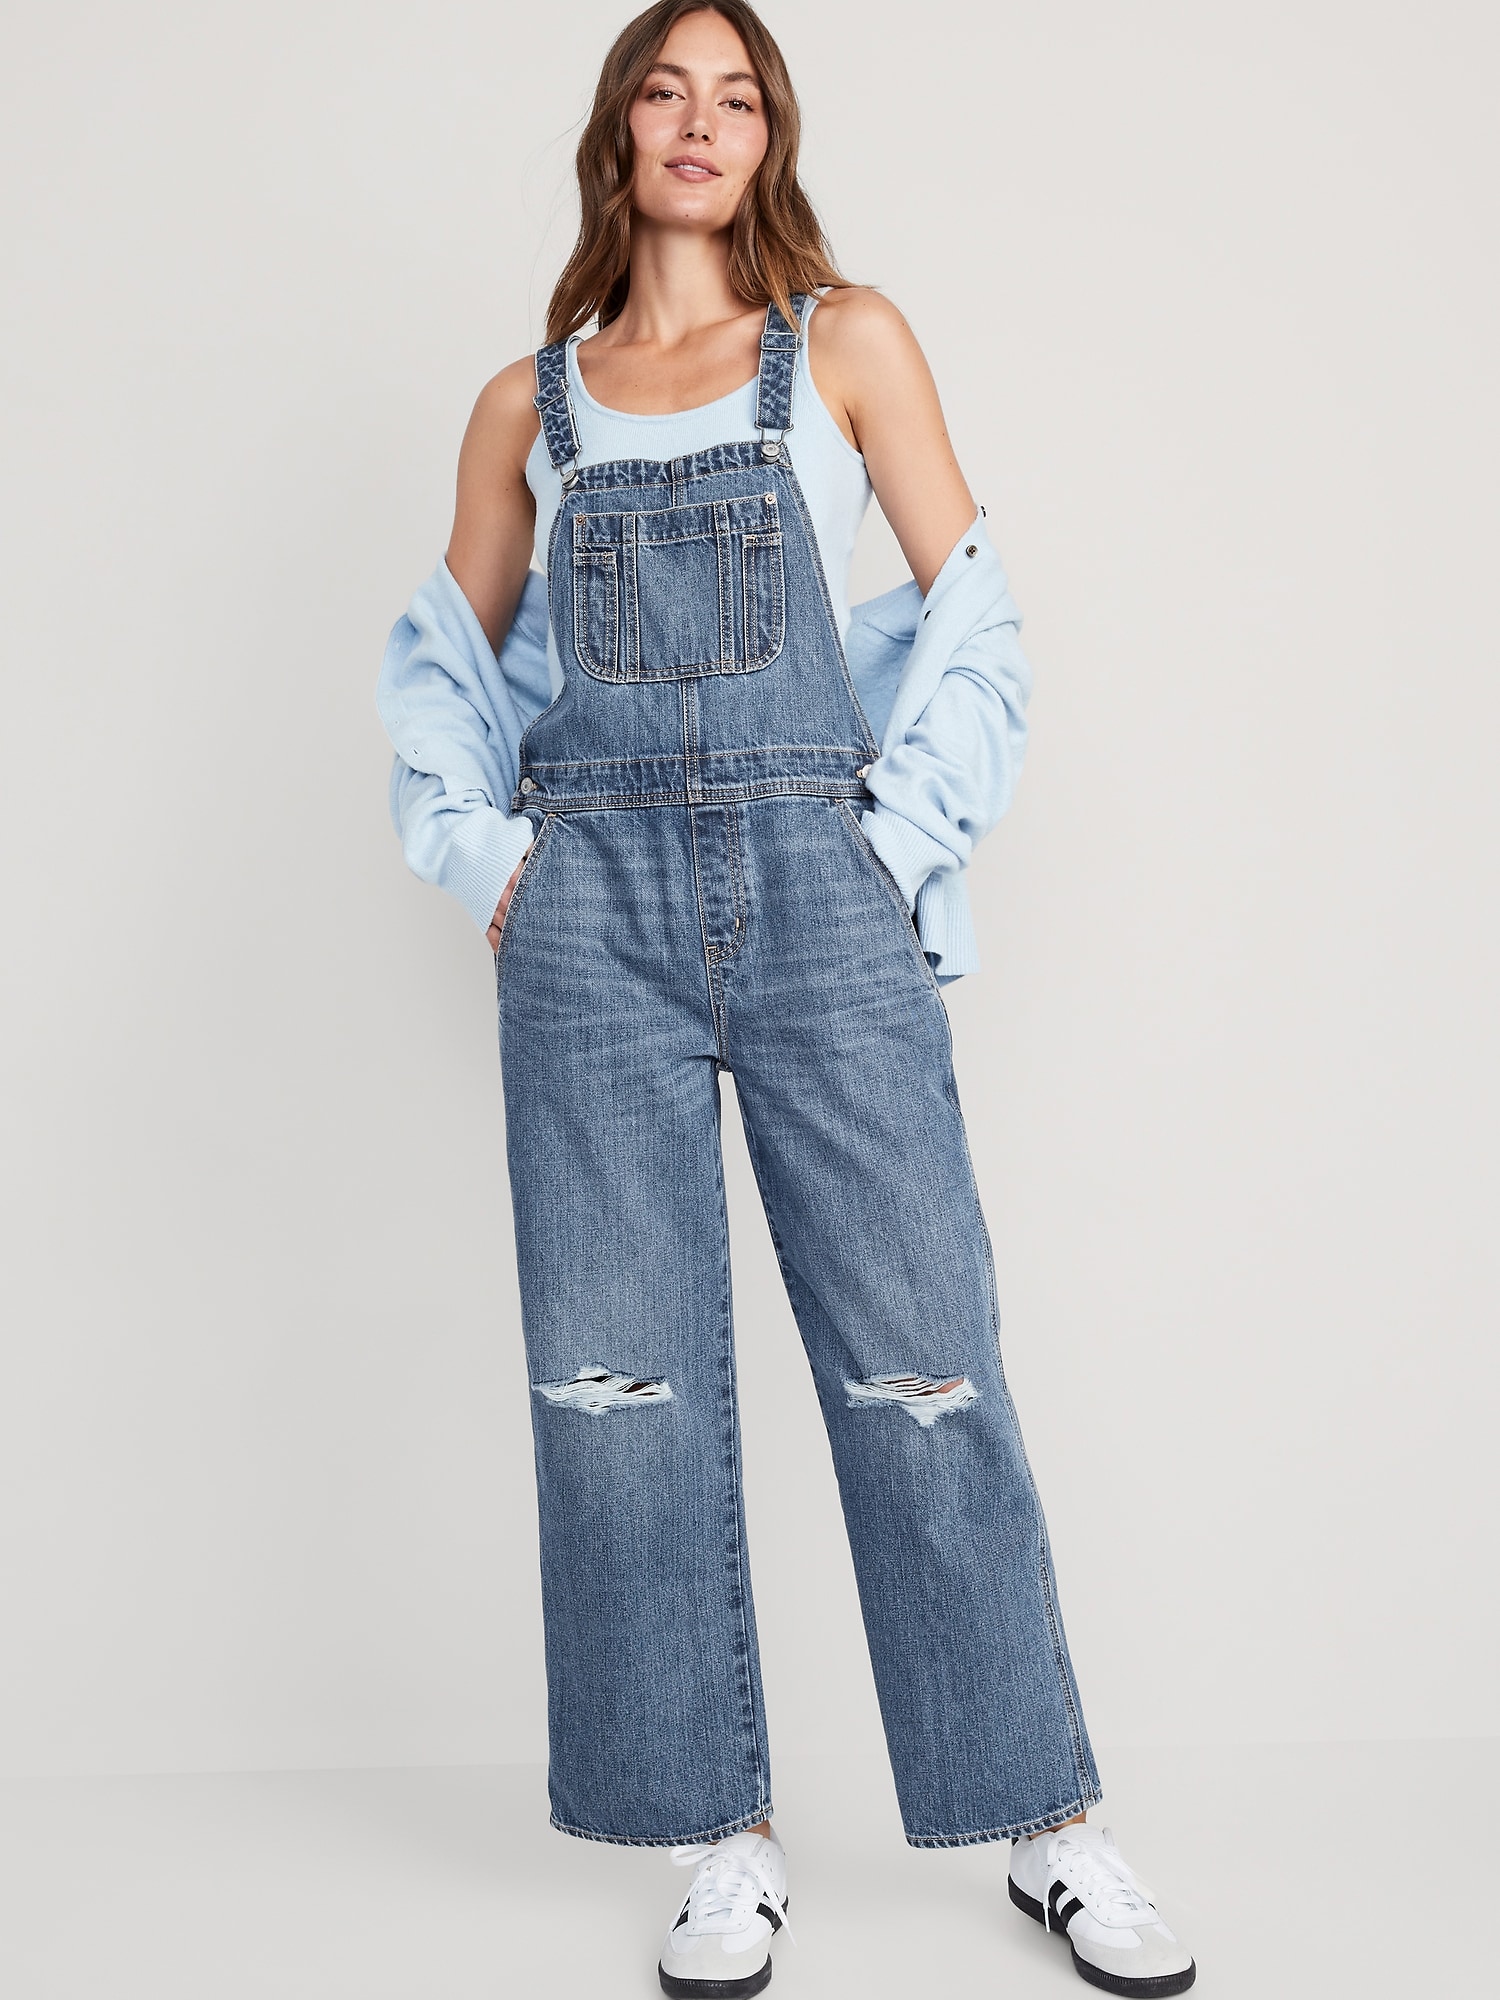 Old Navy Baggy Wide-Leg Non-Stretch Ripped Jean Overalls for Women blue. 1